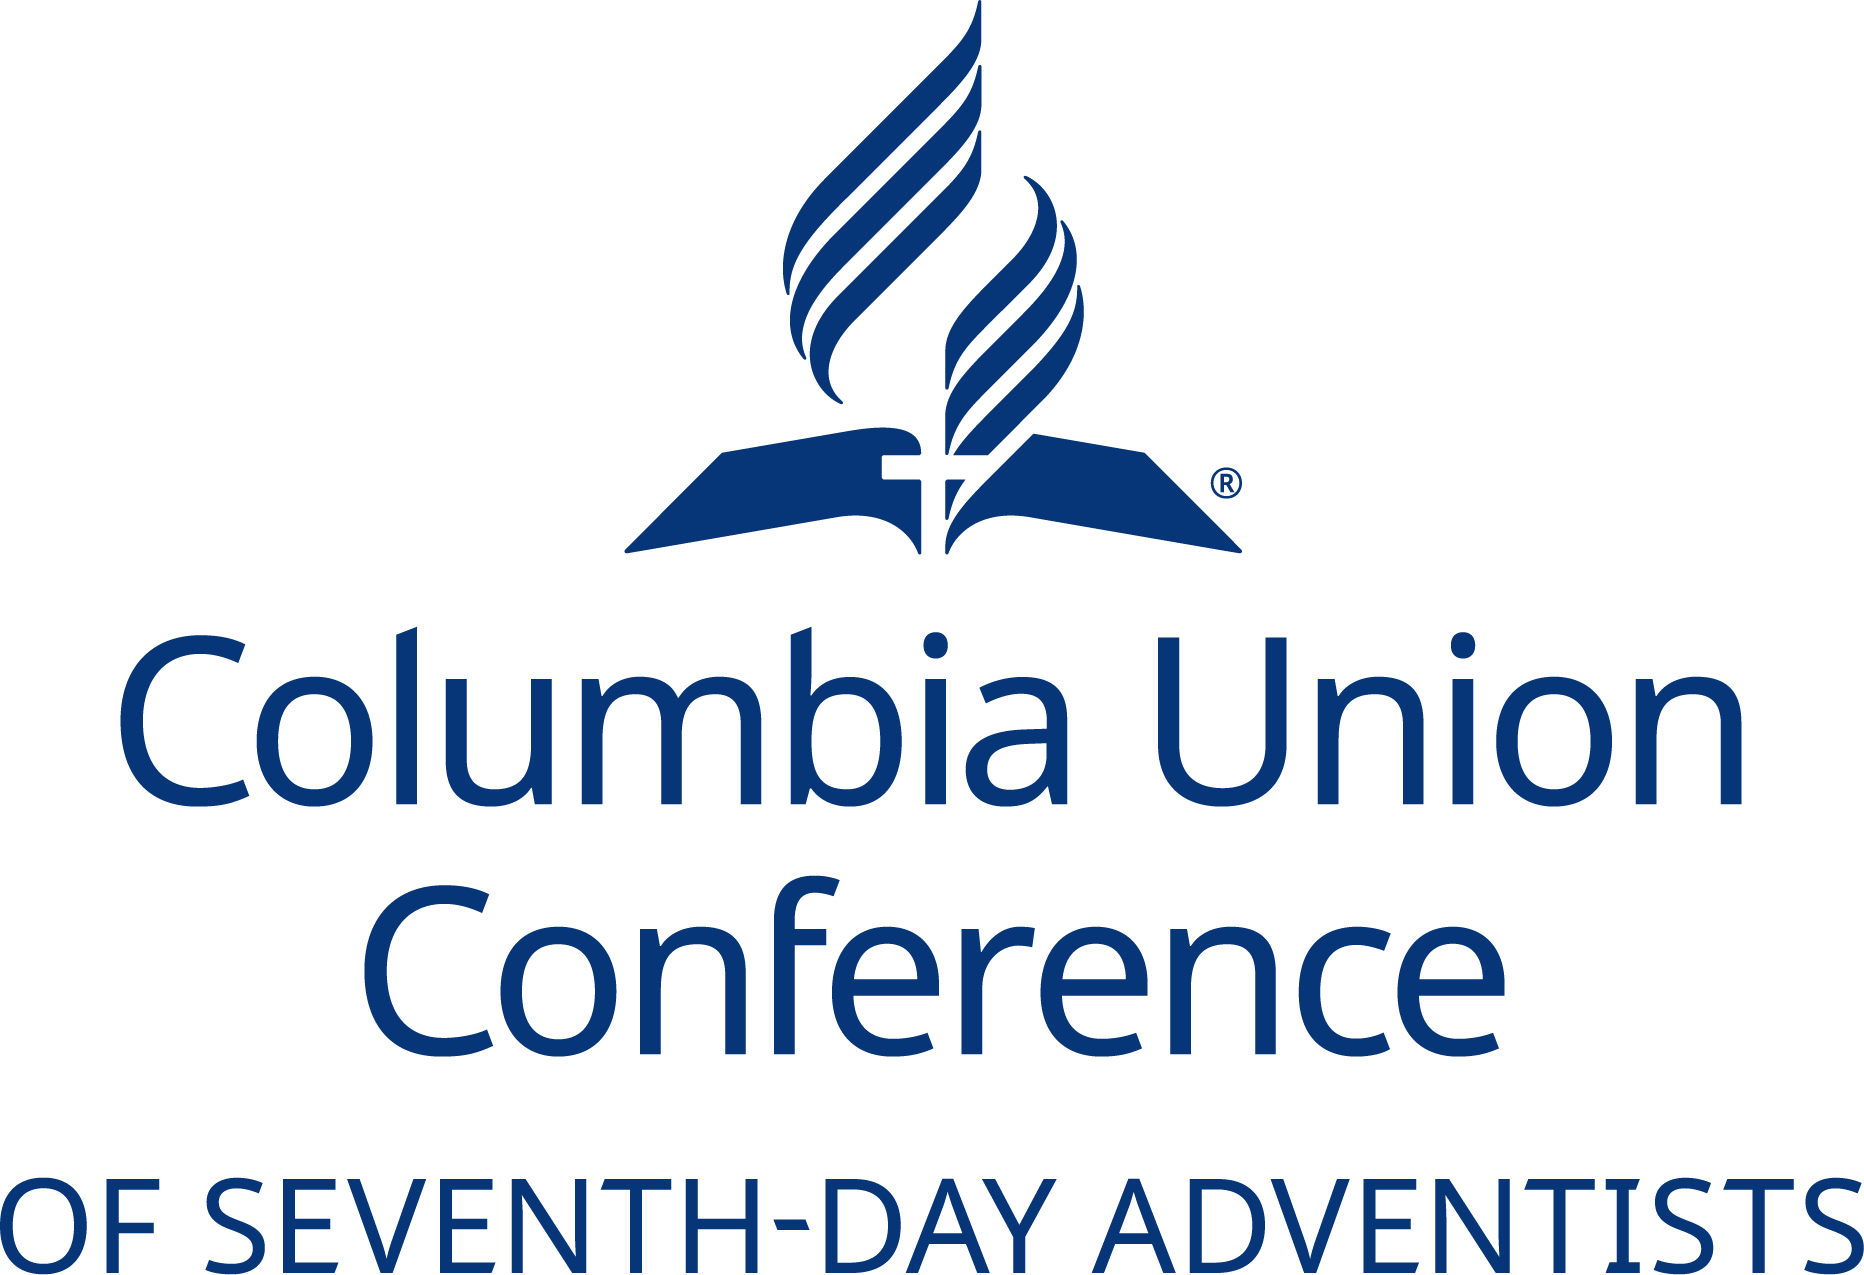 Columbia Union Conference of Seventh-day Adventists